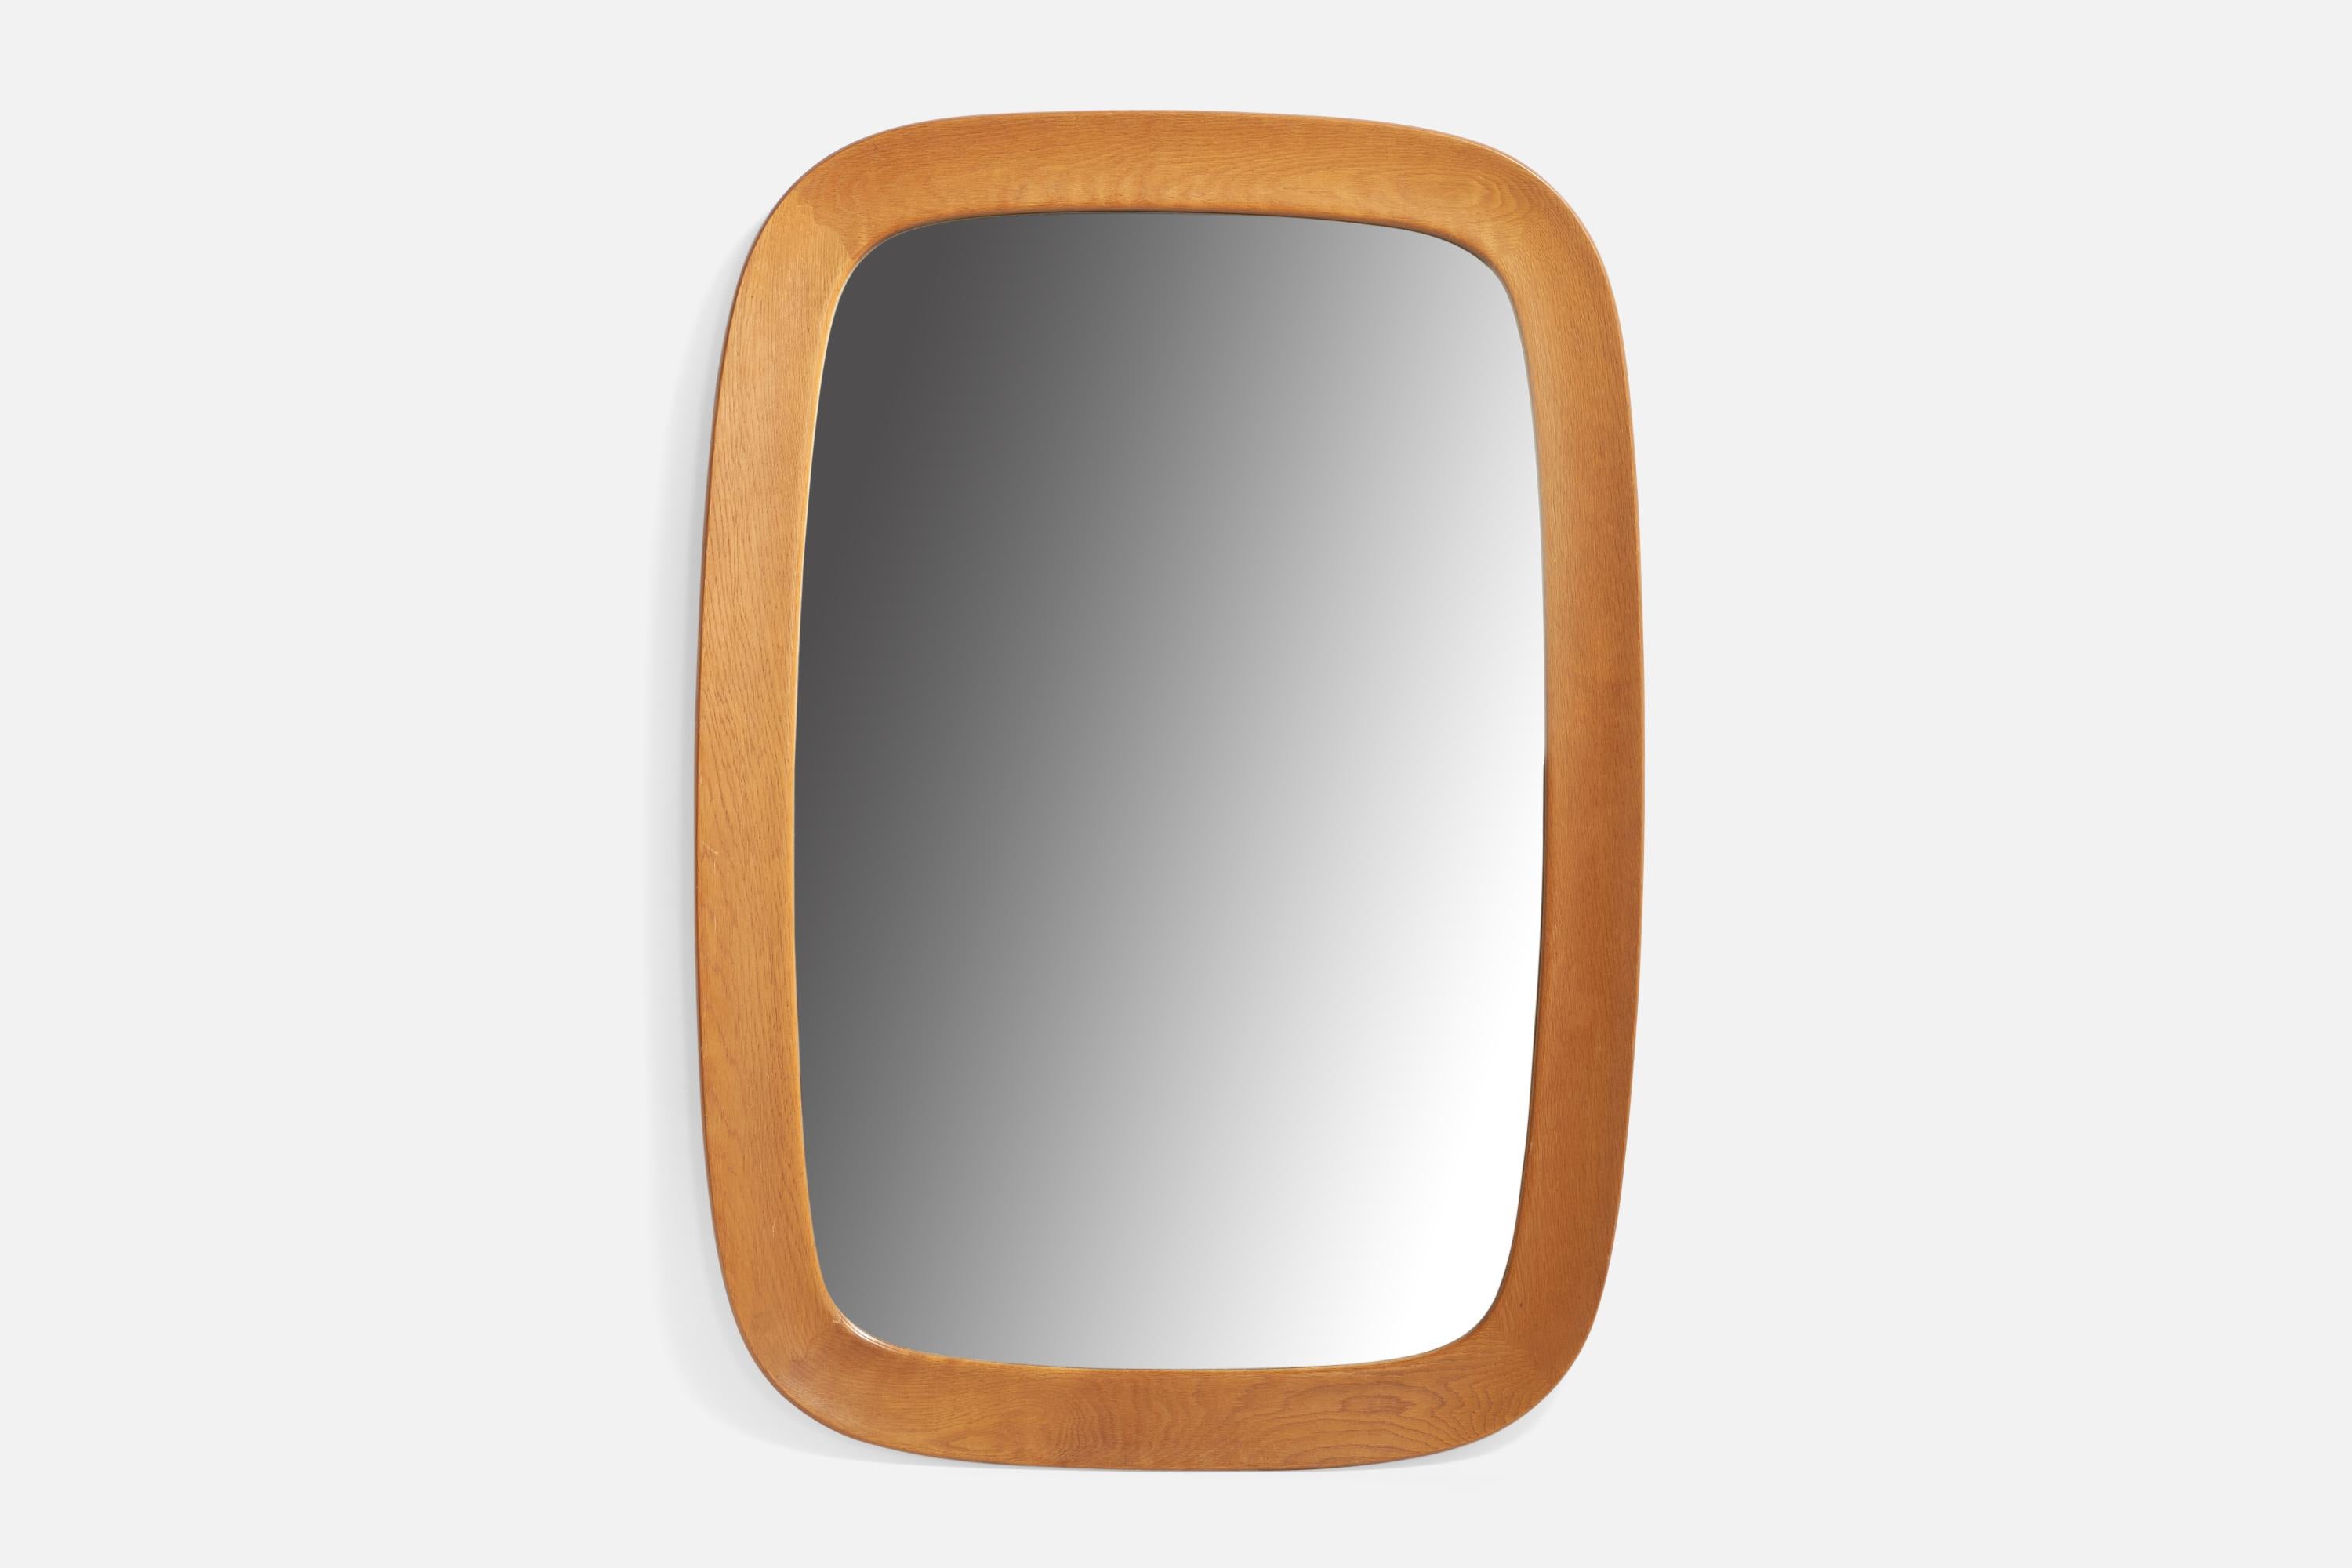 A sizeable oak wall mirror designed and produced by Fröske AB Nybrofabriken, Sweden, c. 1960s.